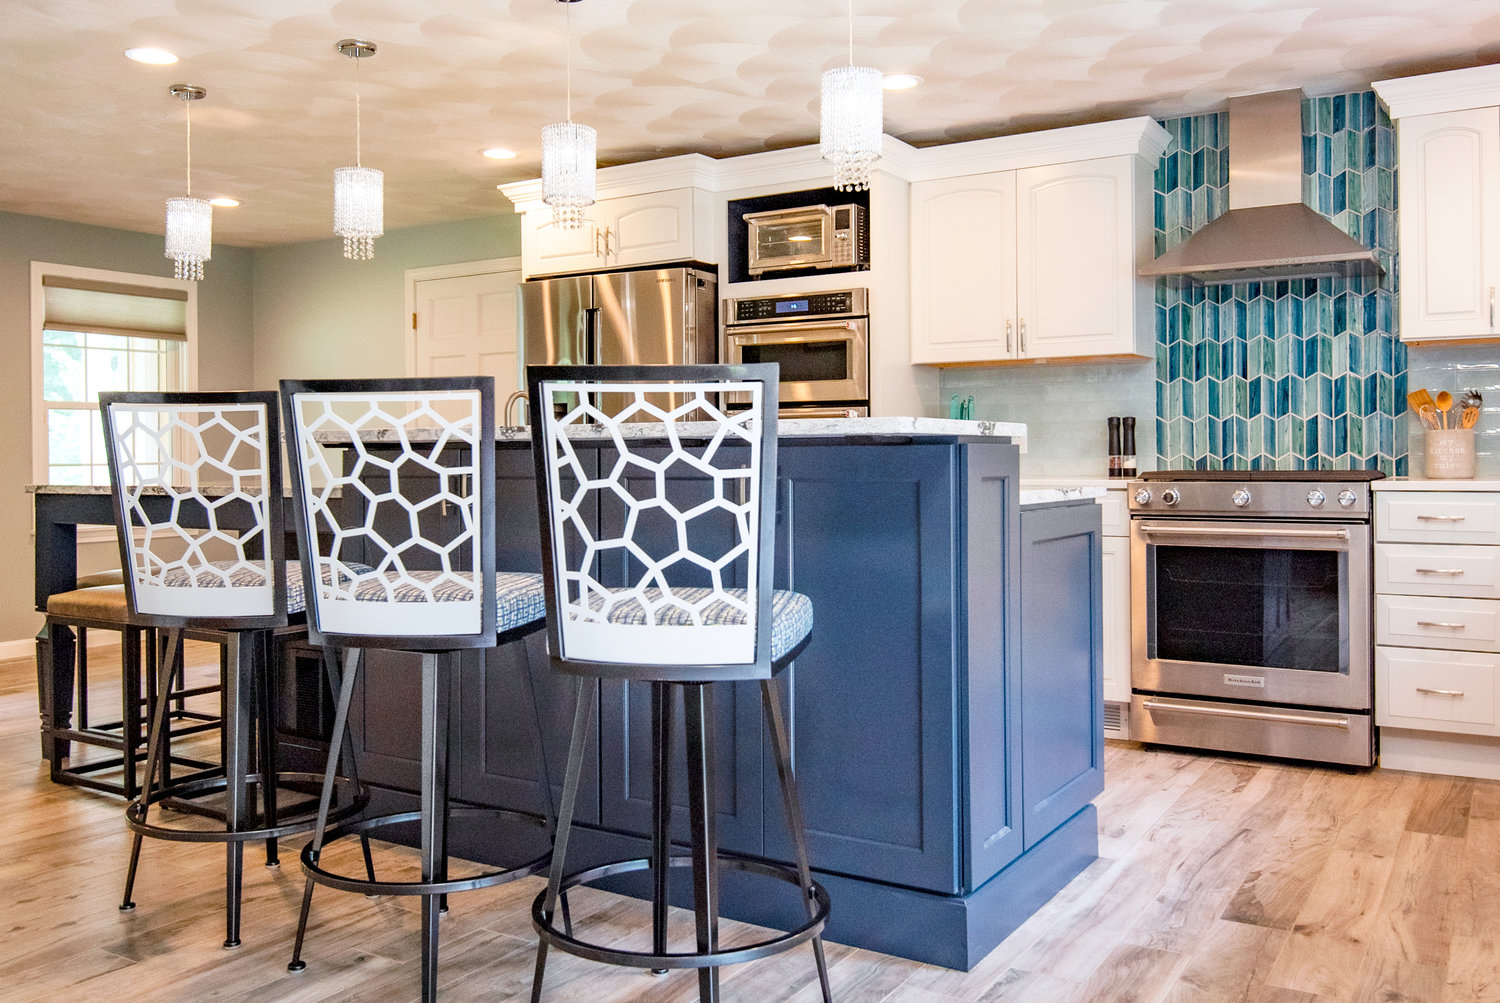 A trio of custom bar stools adds unexpected panache